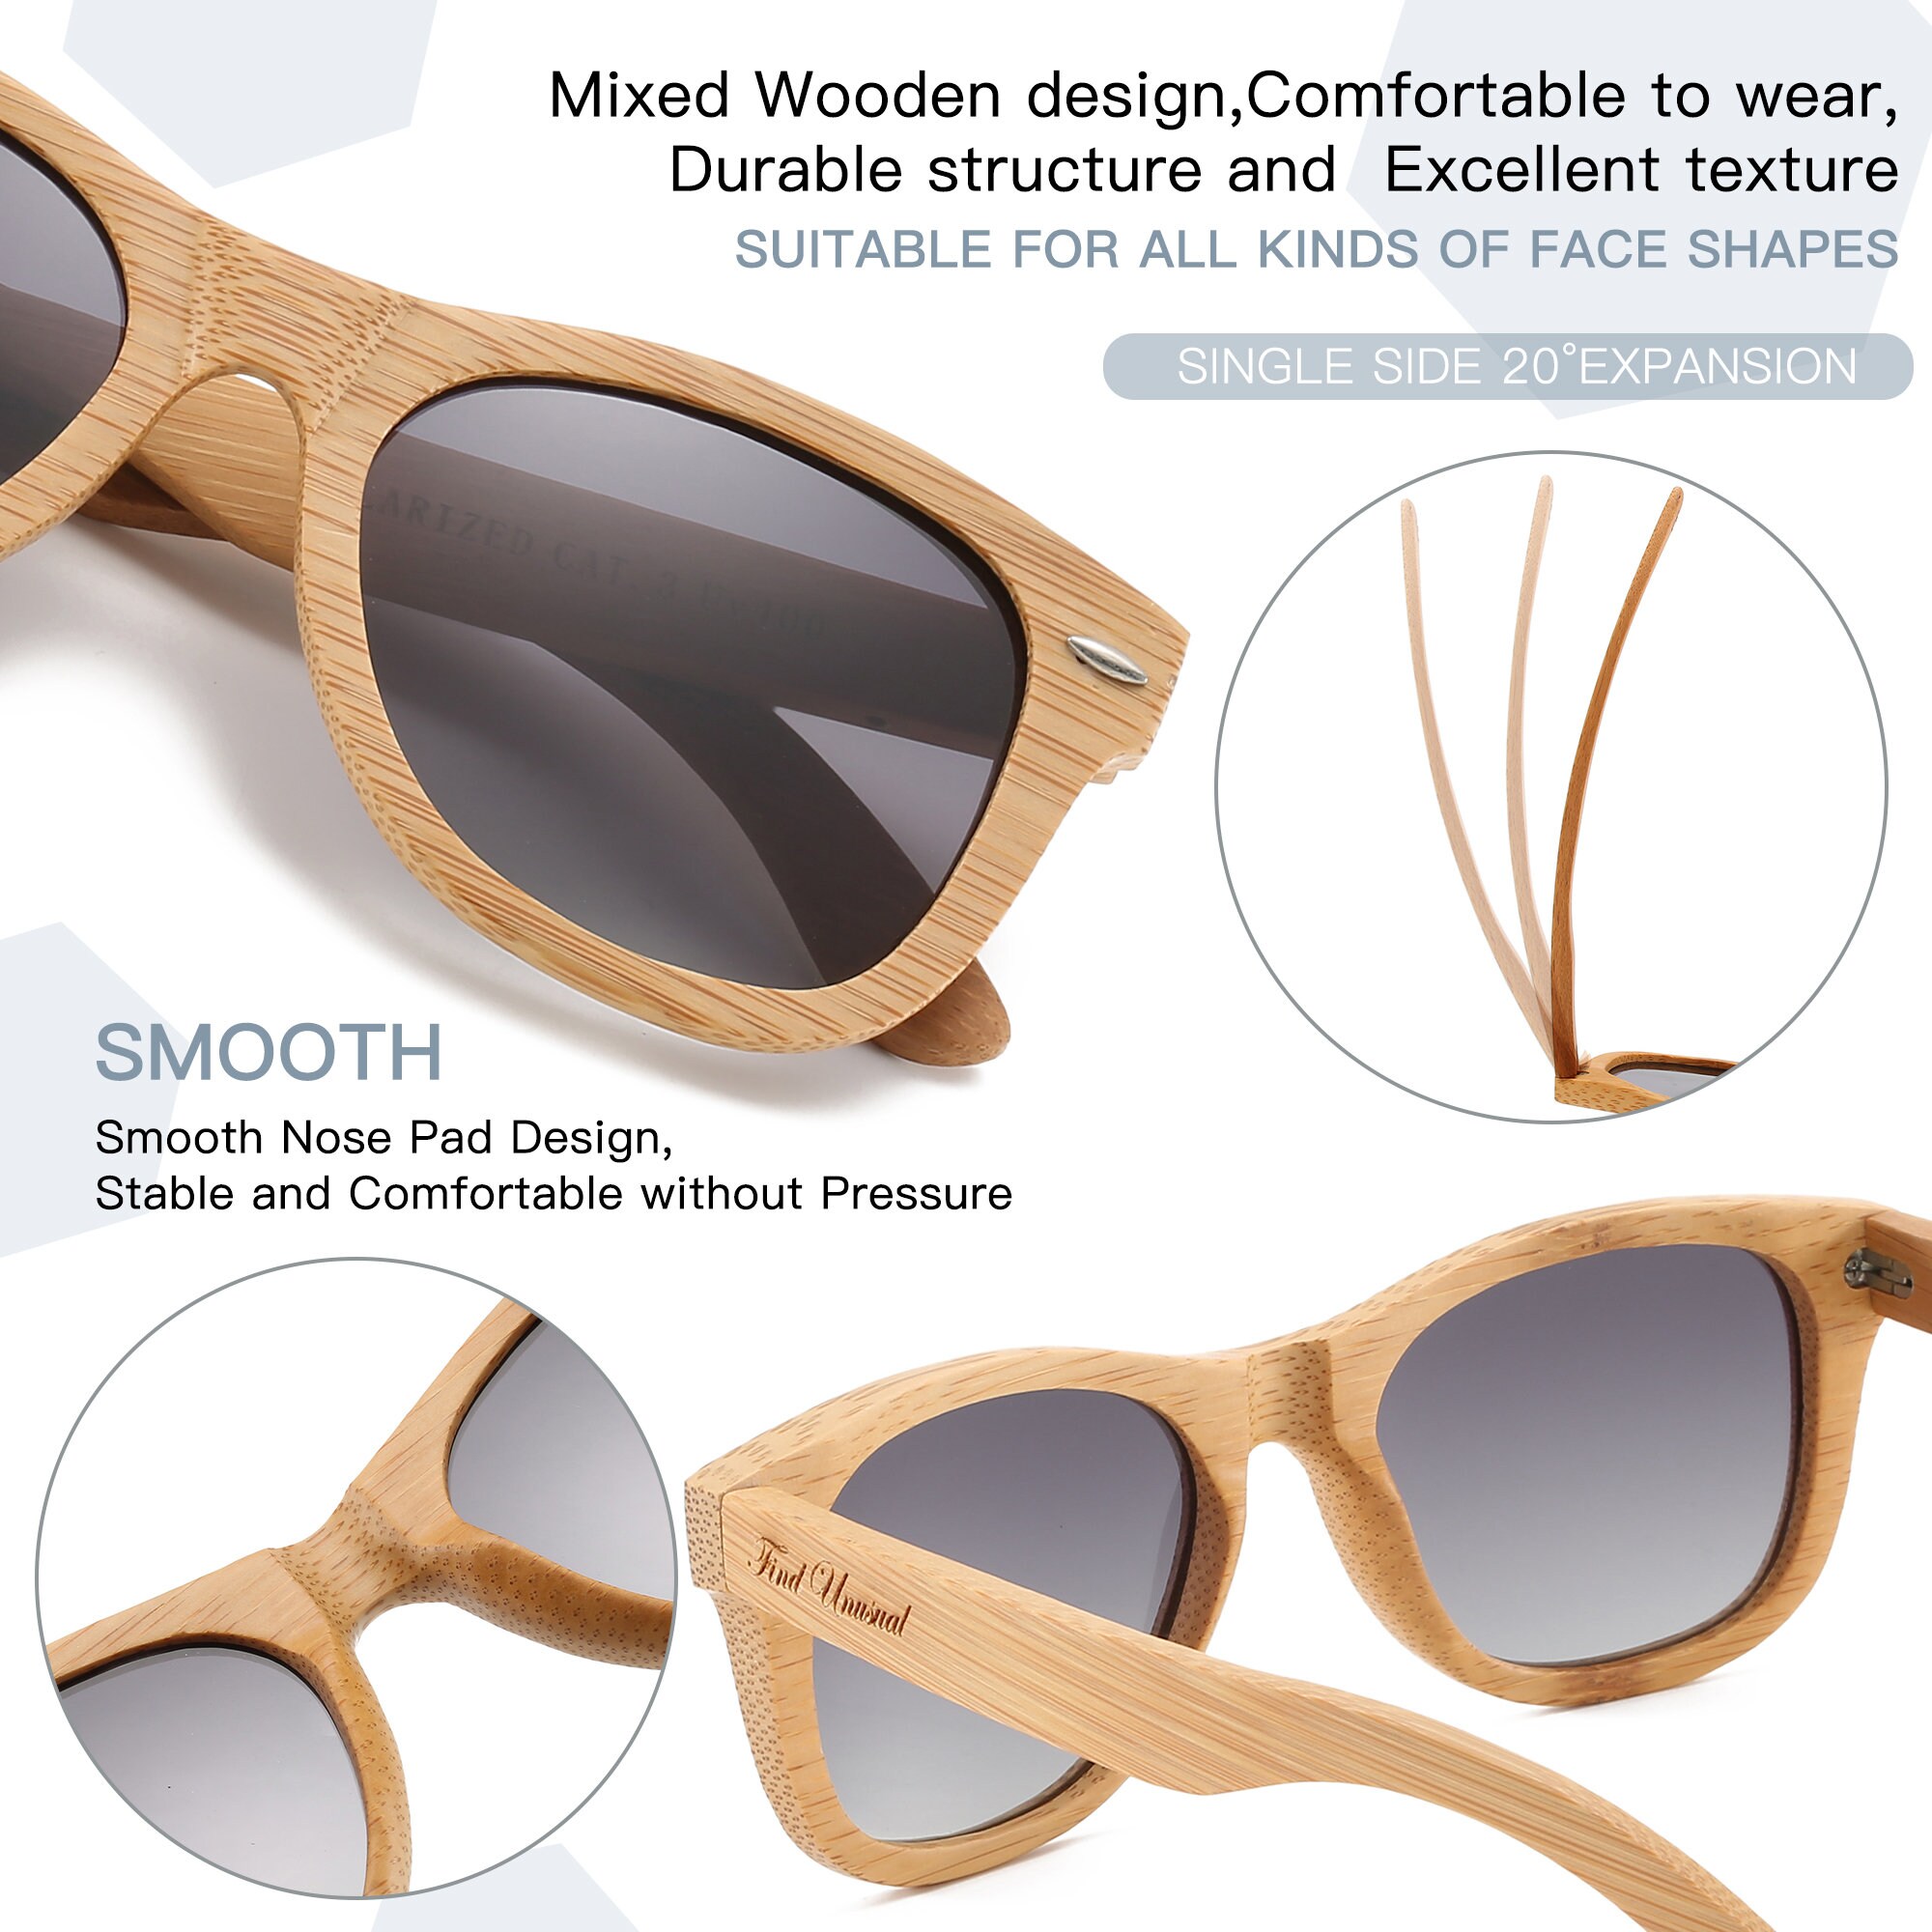 Know the bamboo glasses｜We are selling eyeglasses of natural